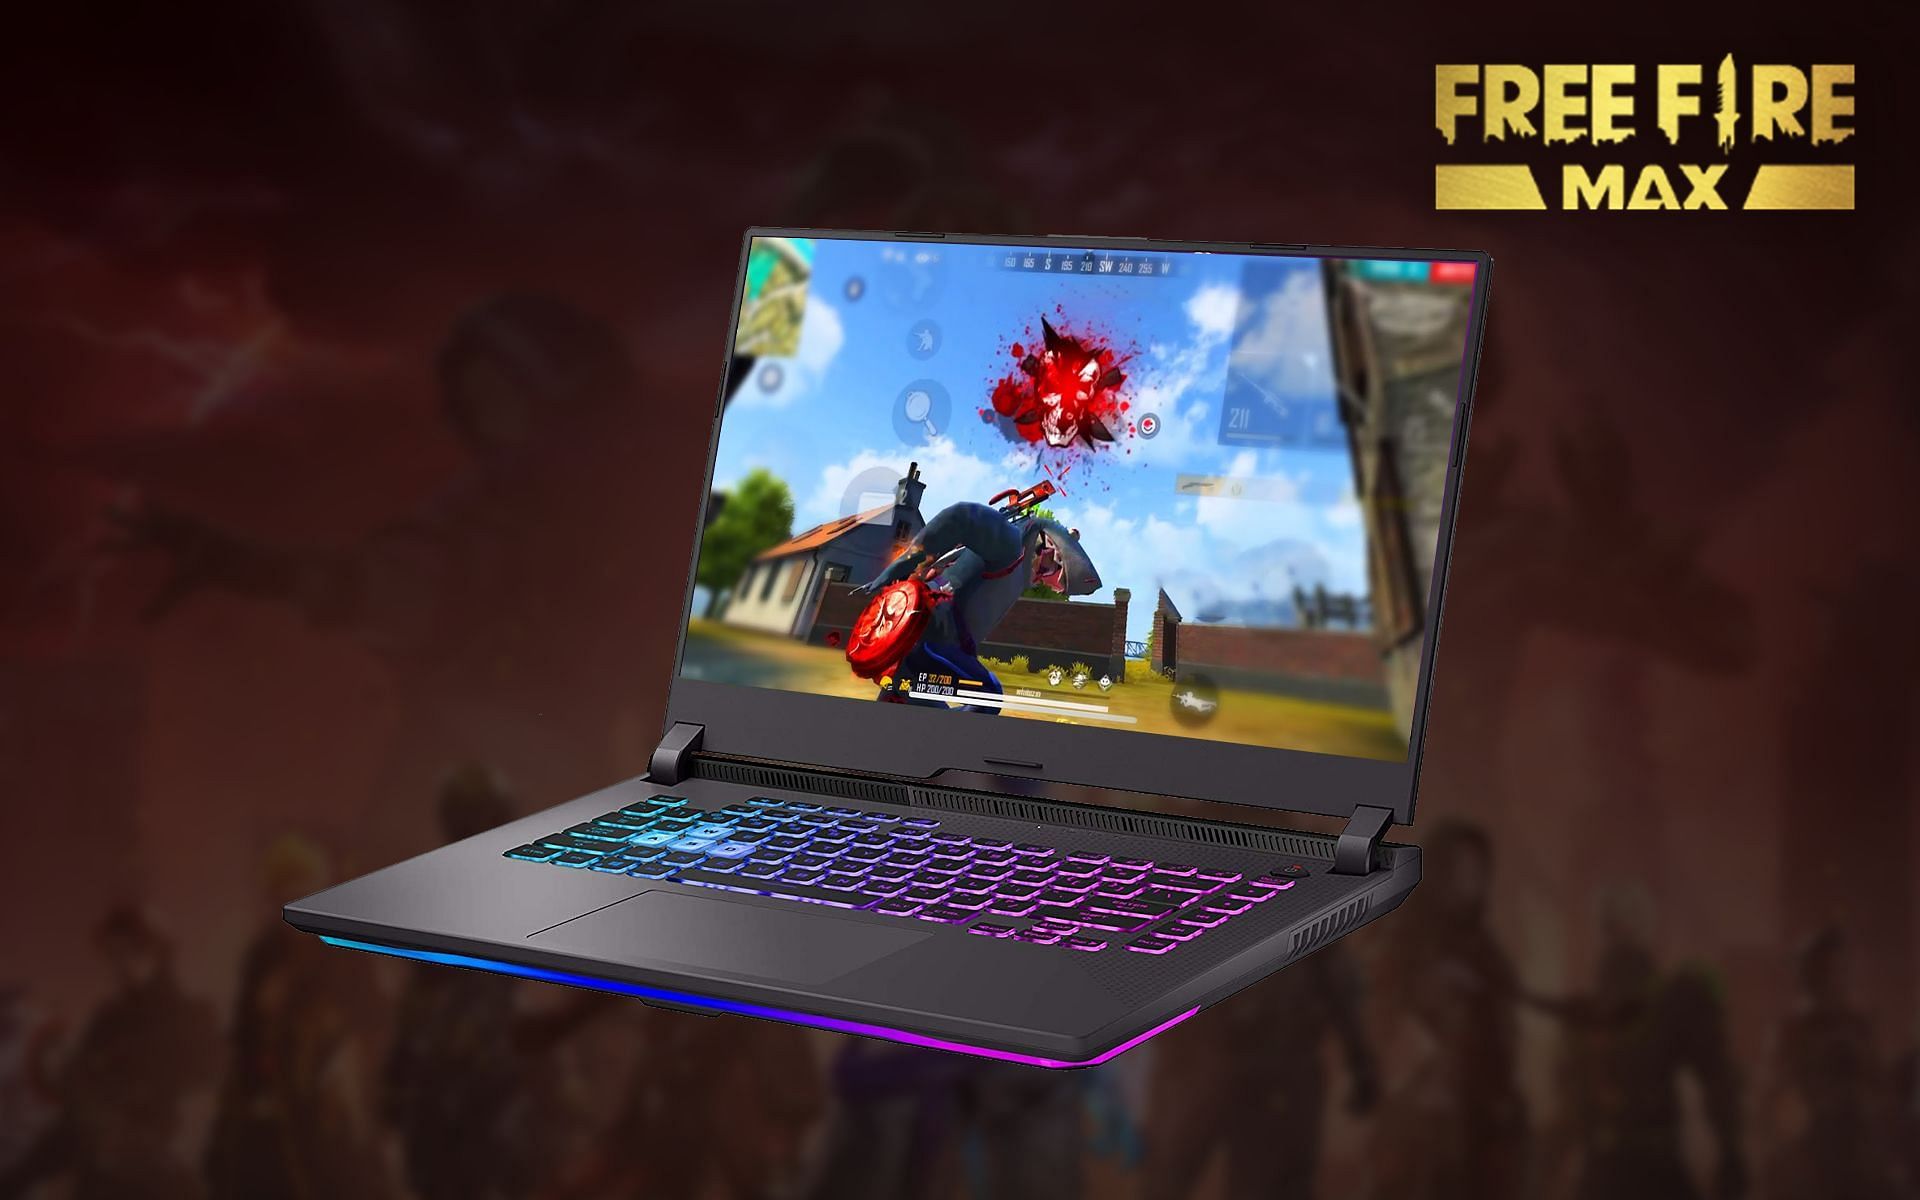 3 best emulators to play Free Fire on PC/Laptops in 2022